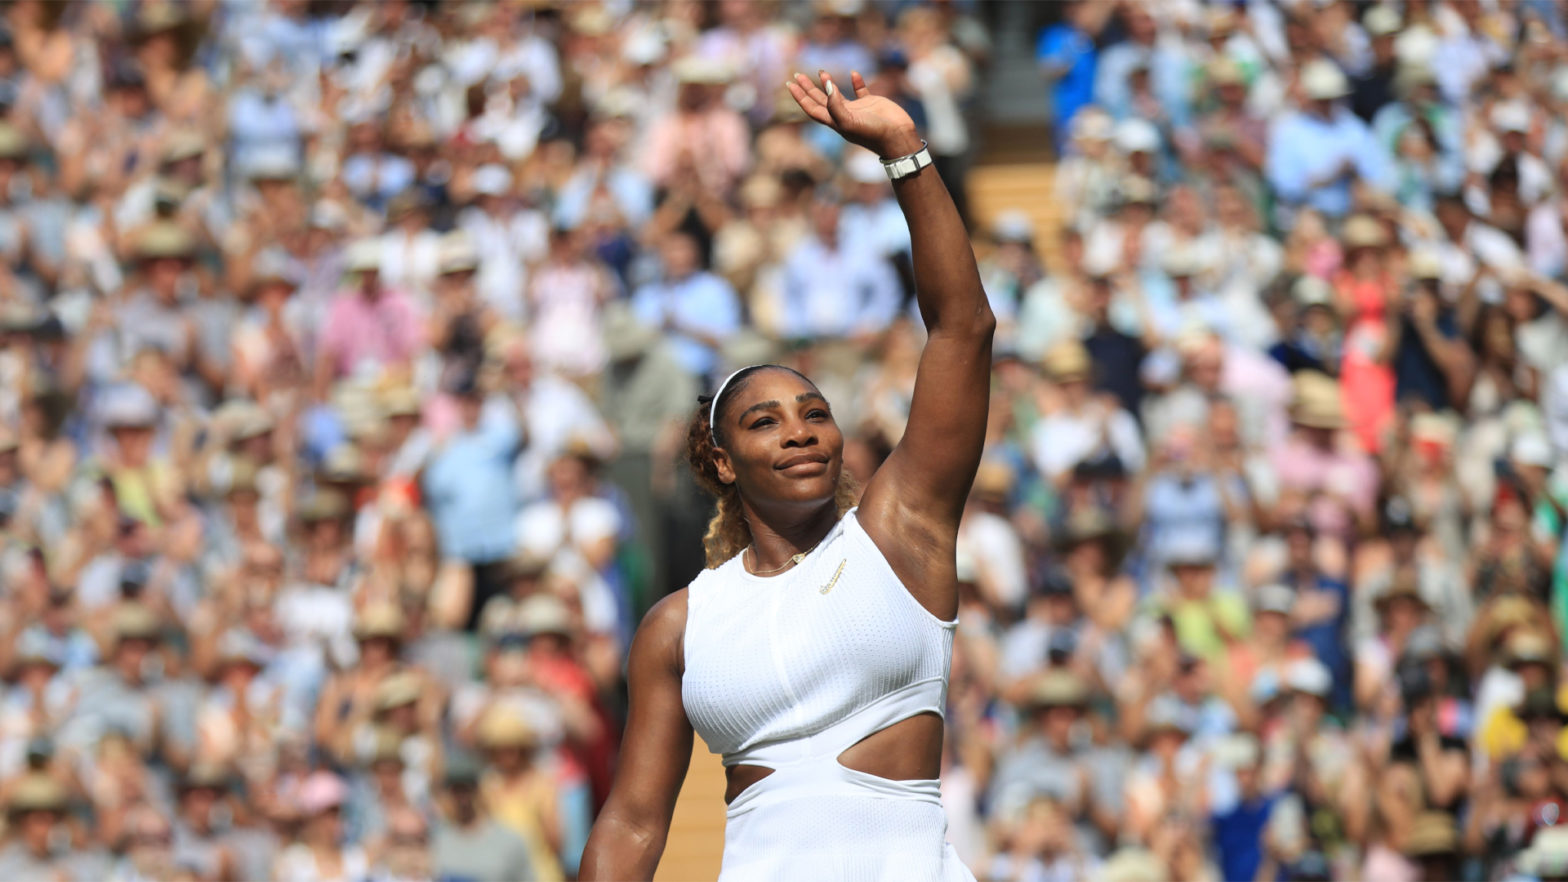 Serena Williams Teams Up With Cloud9 To Nurture The Next Generation Of Players In Esports